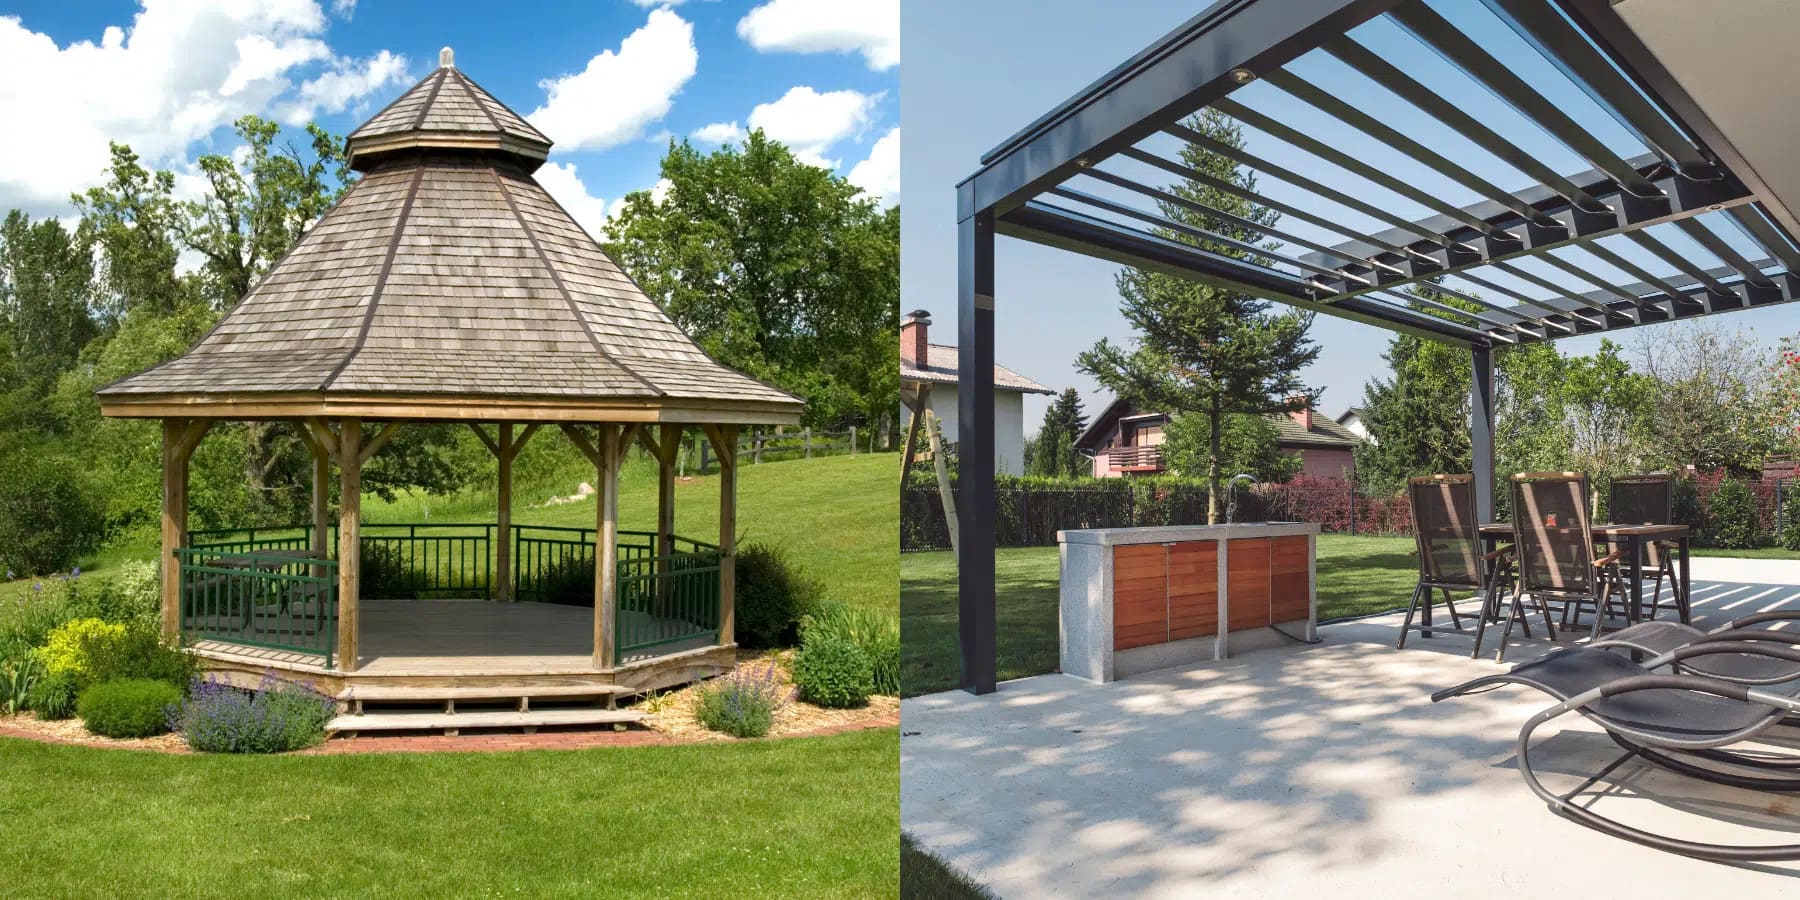 What Is The Difference Between A Pergola And A Gazebo?